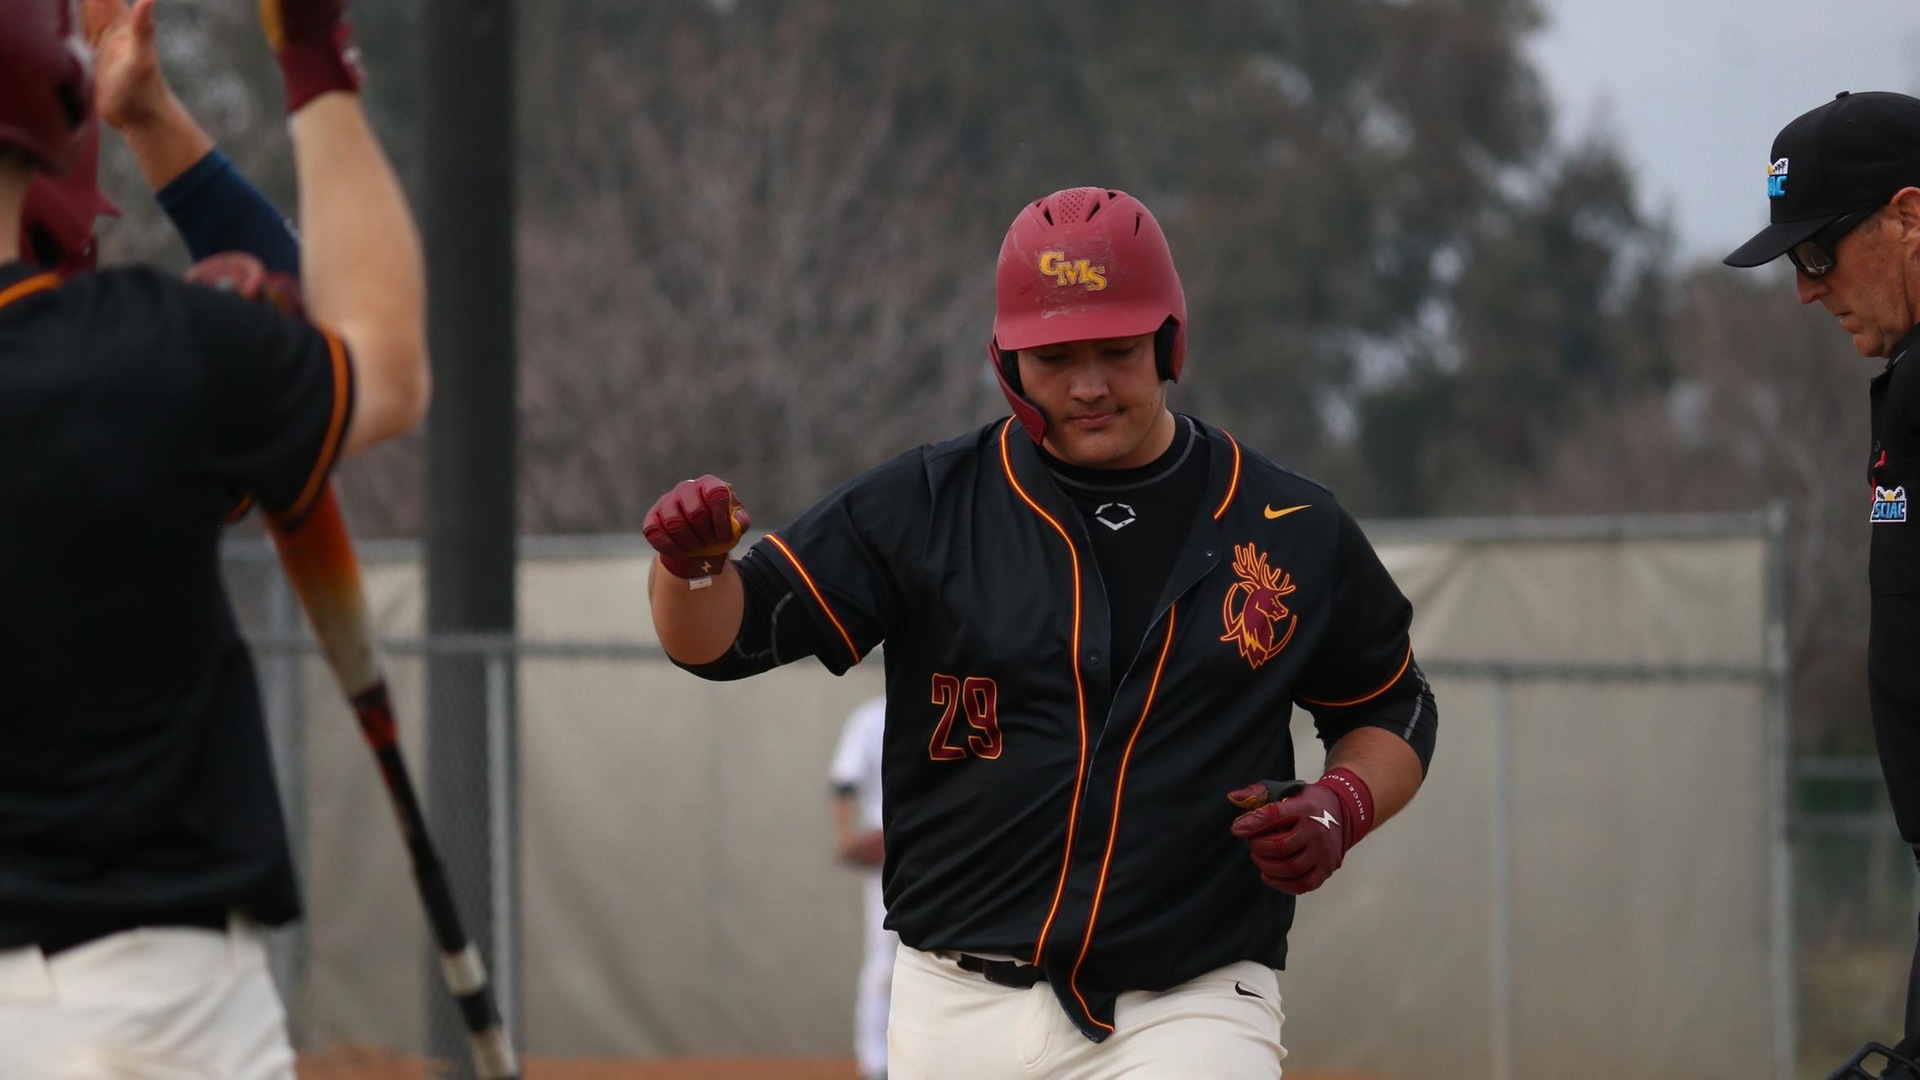 Andrew Mazzone had two homers and 10 RBI in a doubleheader win over Southwestern (Texas) on Saturday.